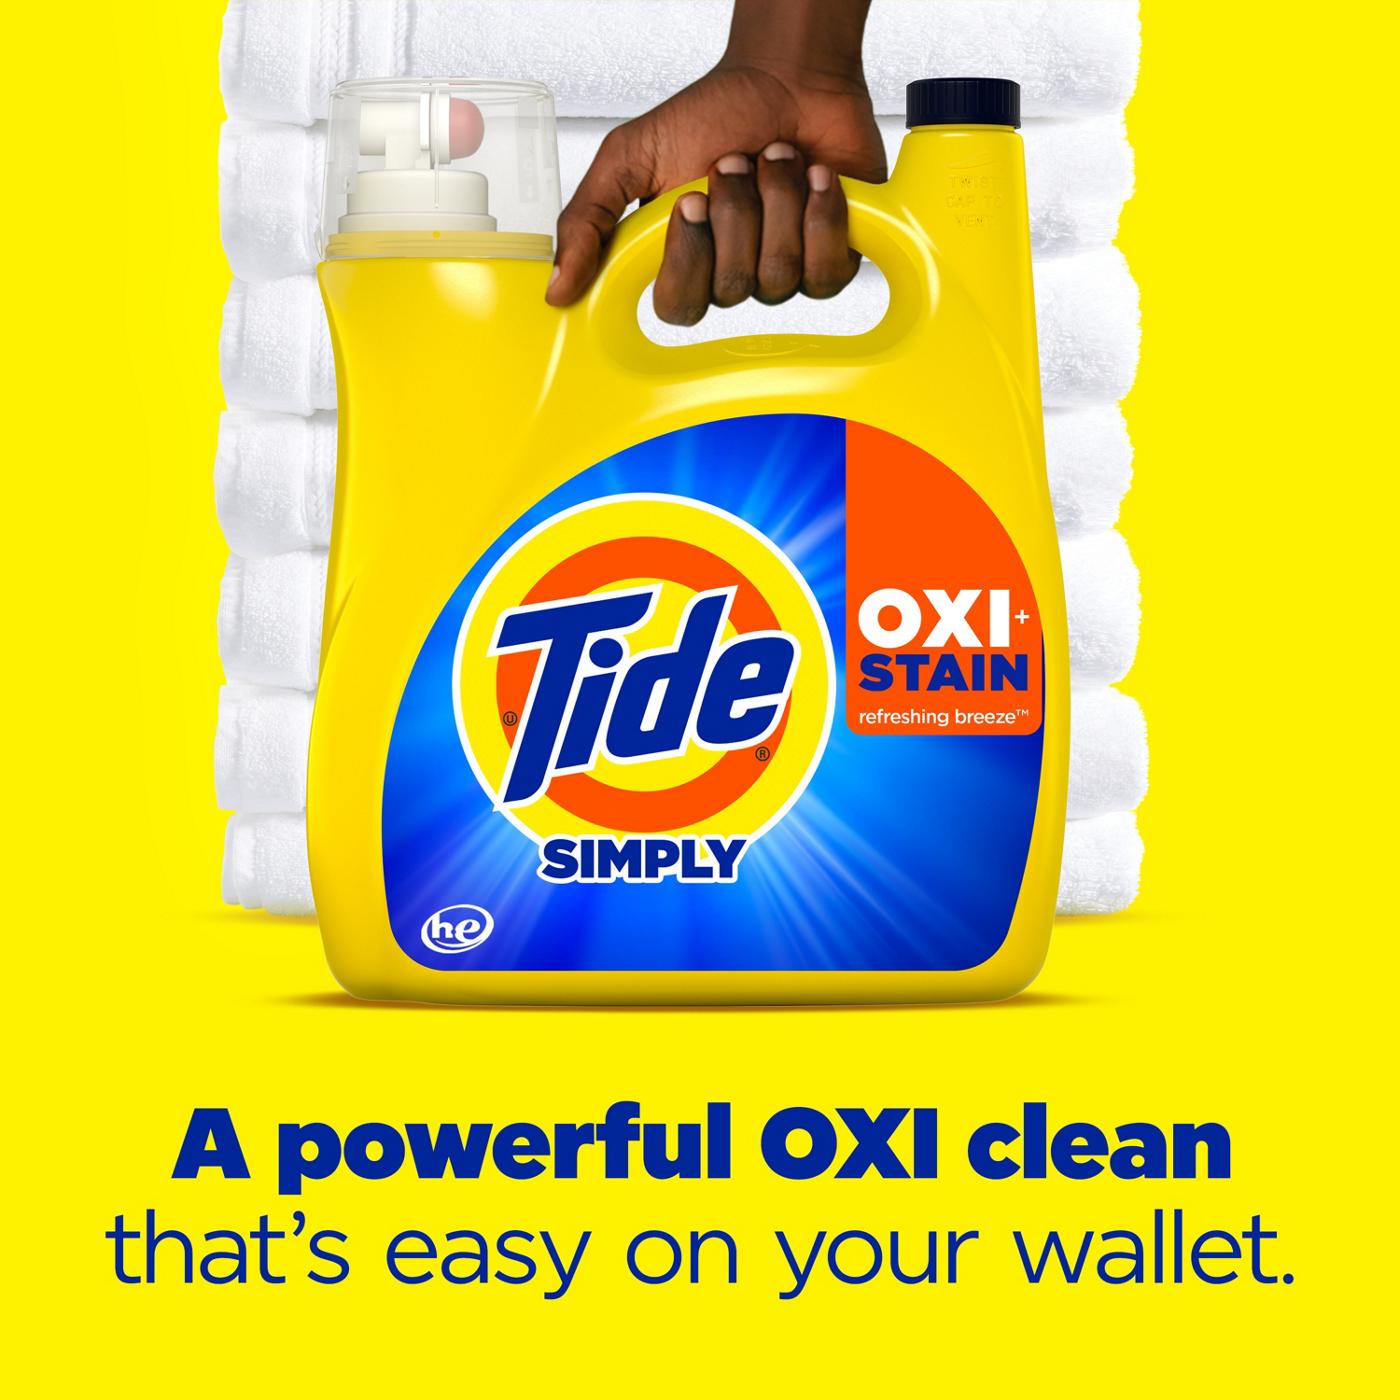 Tide + Simply Oxi HE Liquid Laundry Detergent, 74 Loads - Refreshing Breeze; image 16 of 17